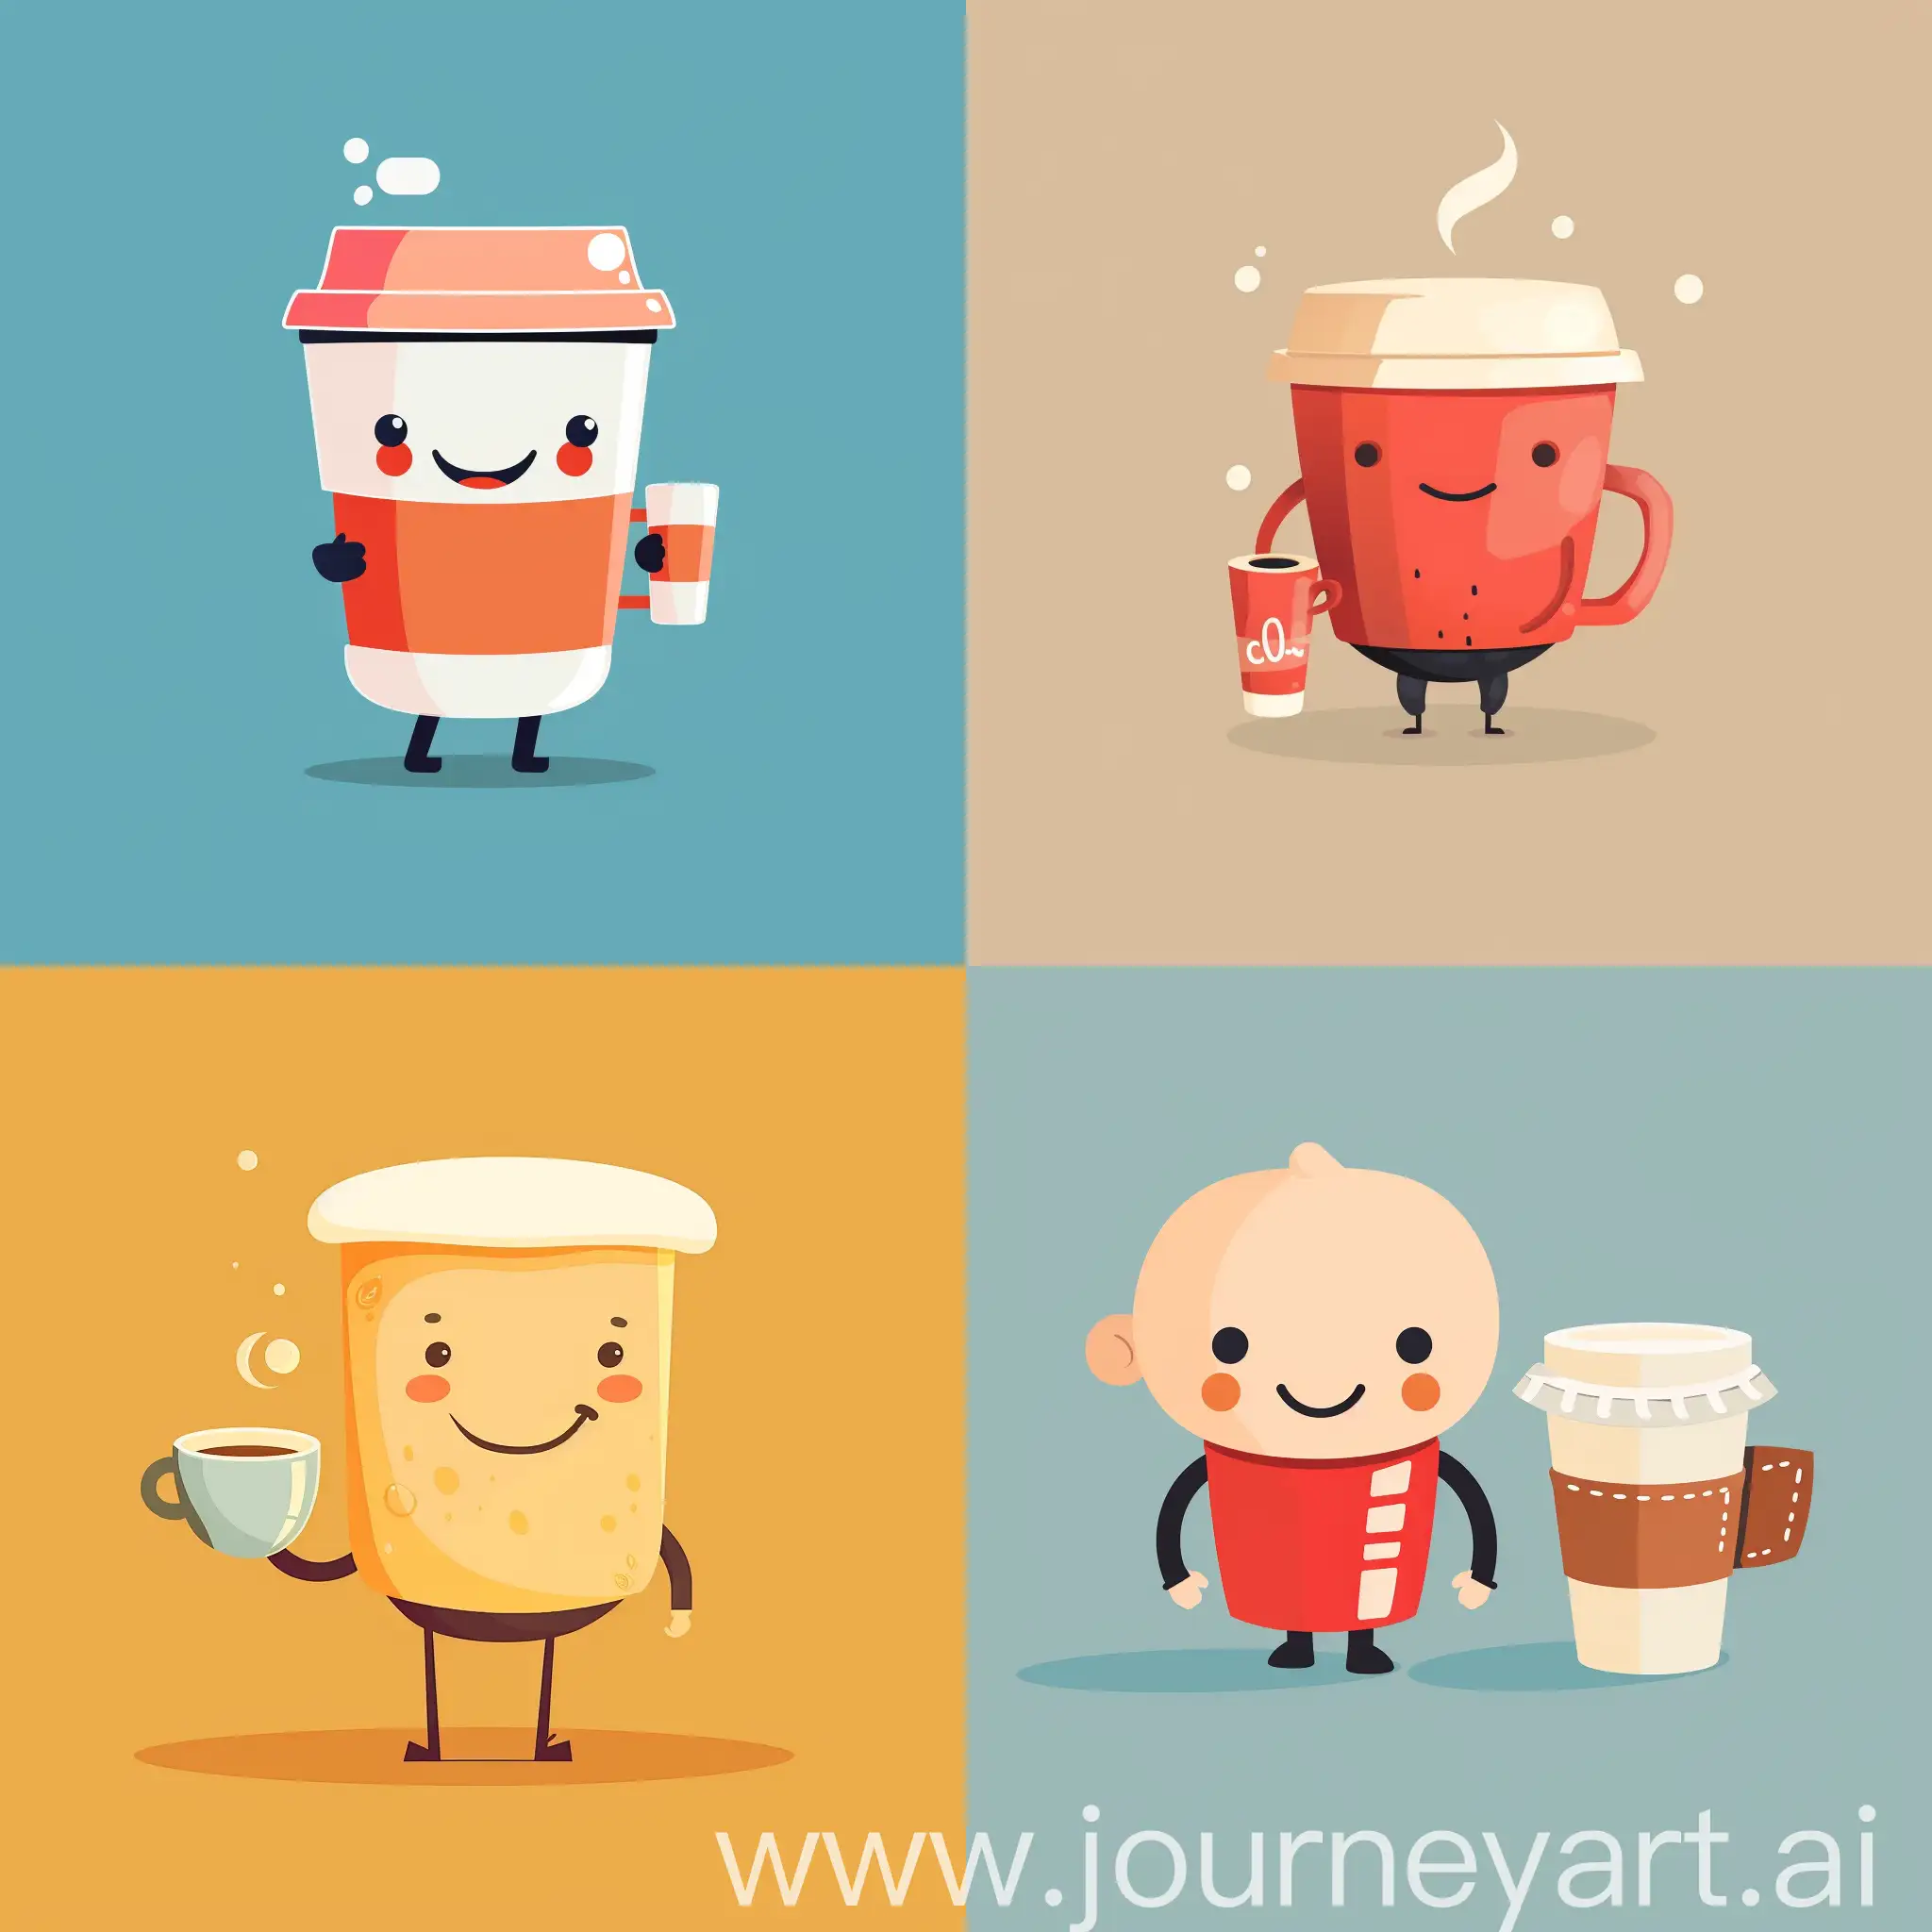 Funny cute character with a cup of coffee, in high quality flat style